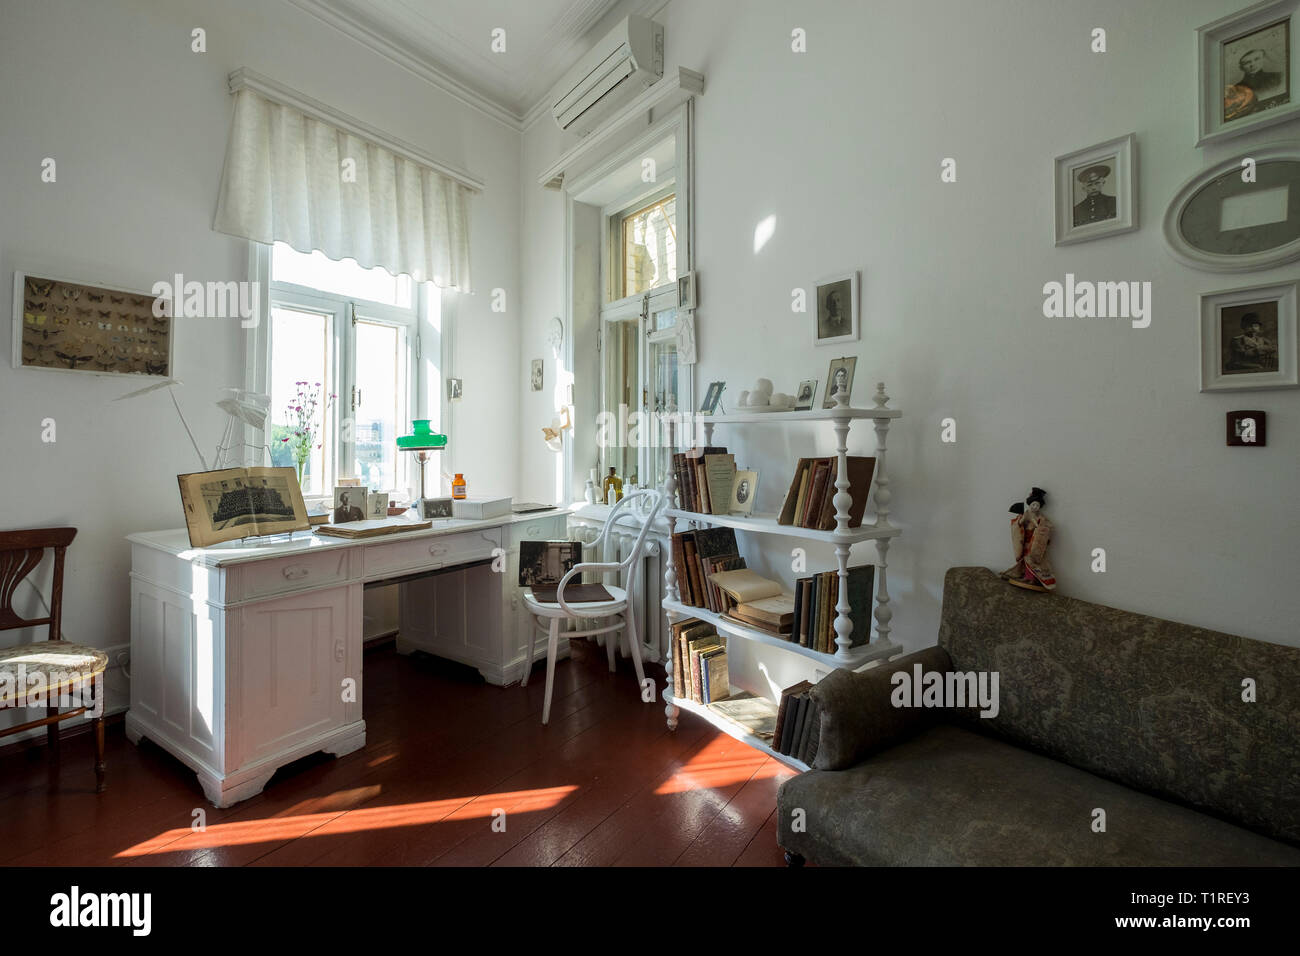 The Russian writer Mikhail Bulgakov's home, now a museum in Kiev, Ukraine. The rooms combine artifacts and settings from his novels. Office. Stock Photo